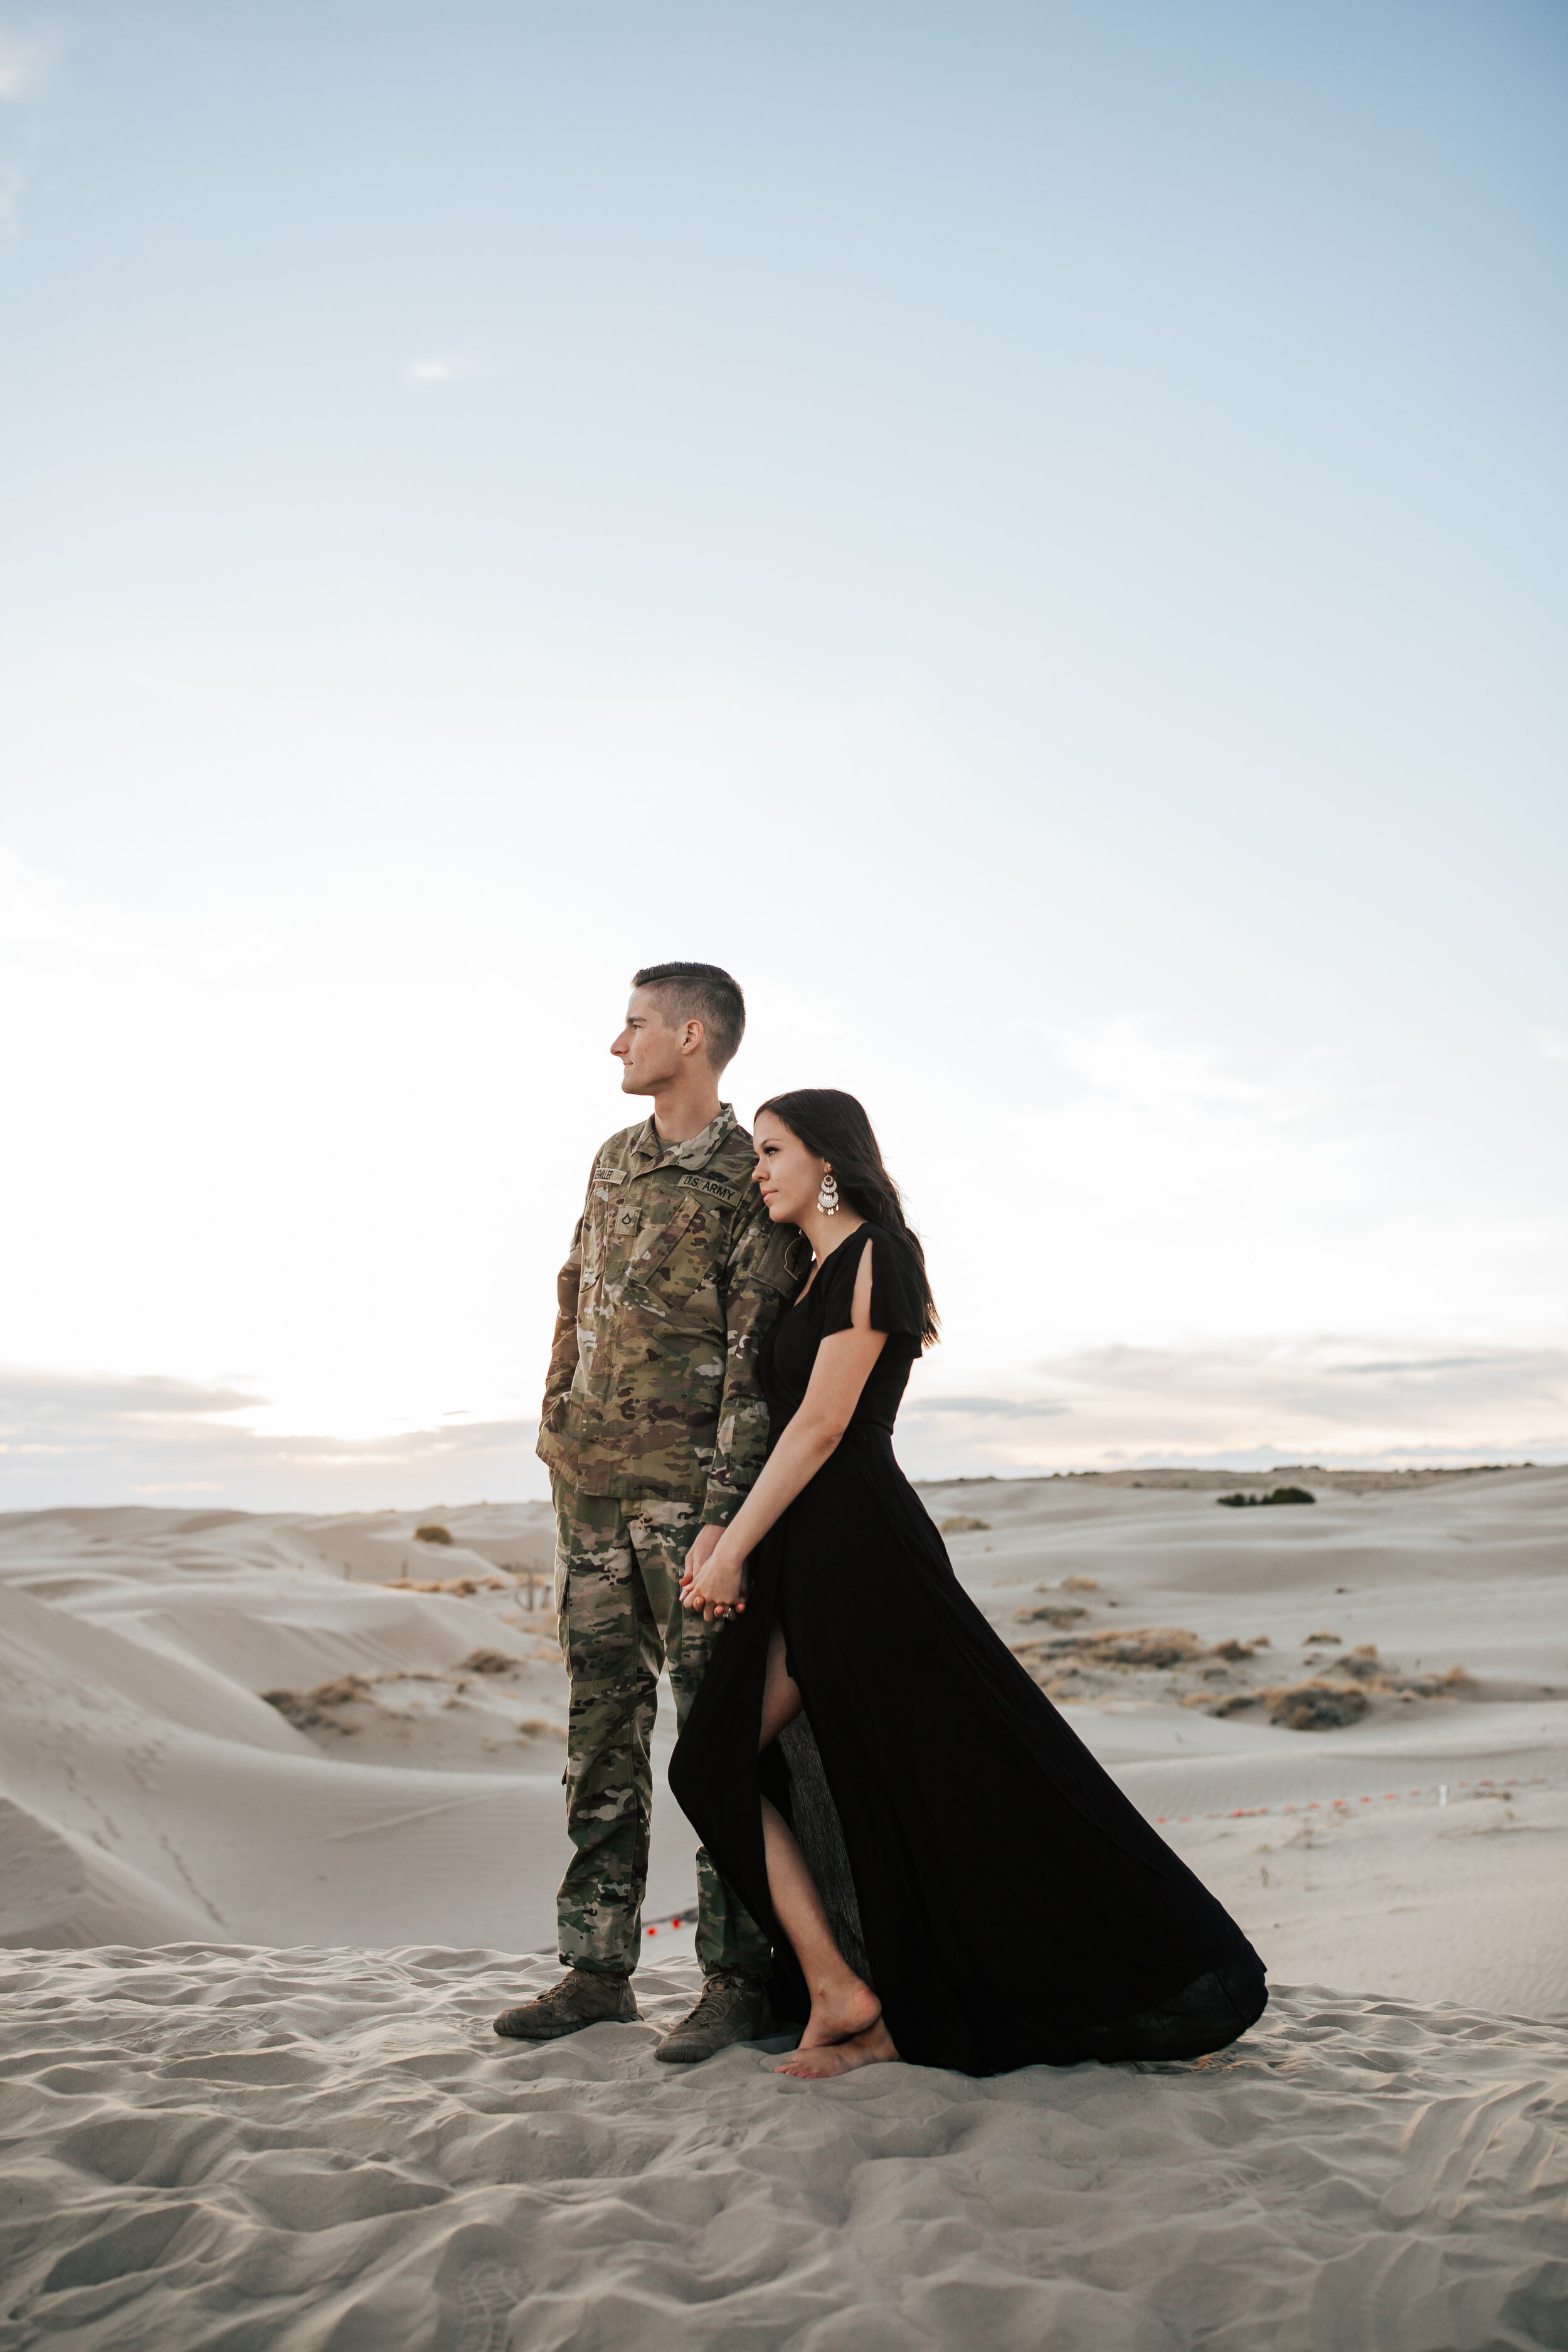  Vow Renewal Photographer Emily Jenkins captures husband in military attire and wife in black dress in the sand dunes of Utah. Sand dune vow renewal wedding do-over anniversary ideas couple vow renewal inspiration renewal style ideas salt lake city p